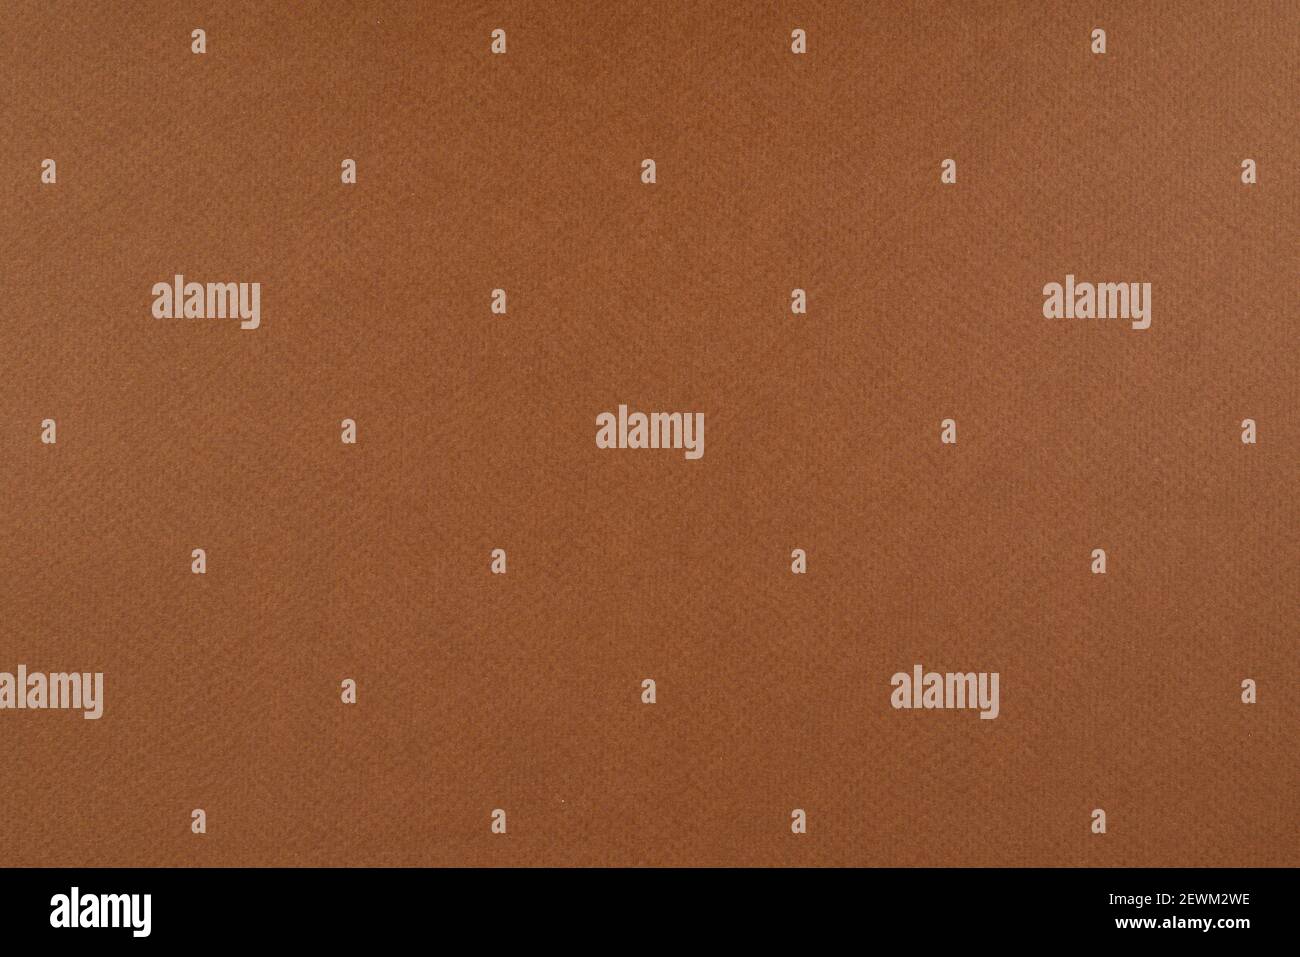 Light brown paper background. Russet brown colour paper texture. Matte monochrome surface with noises. Stock Photo